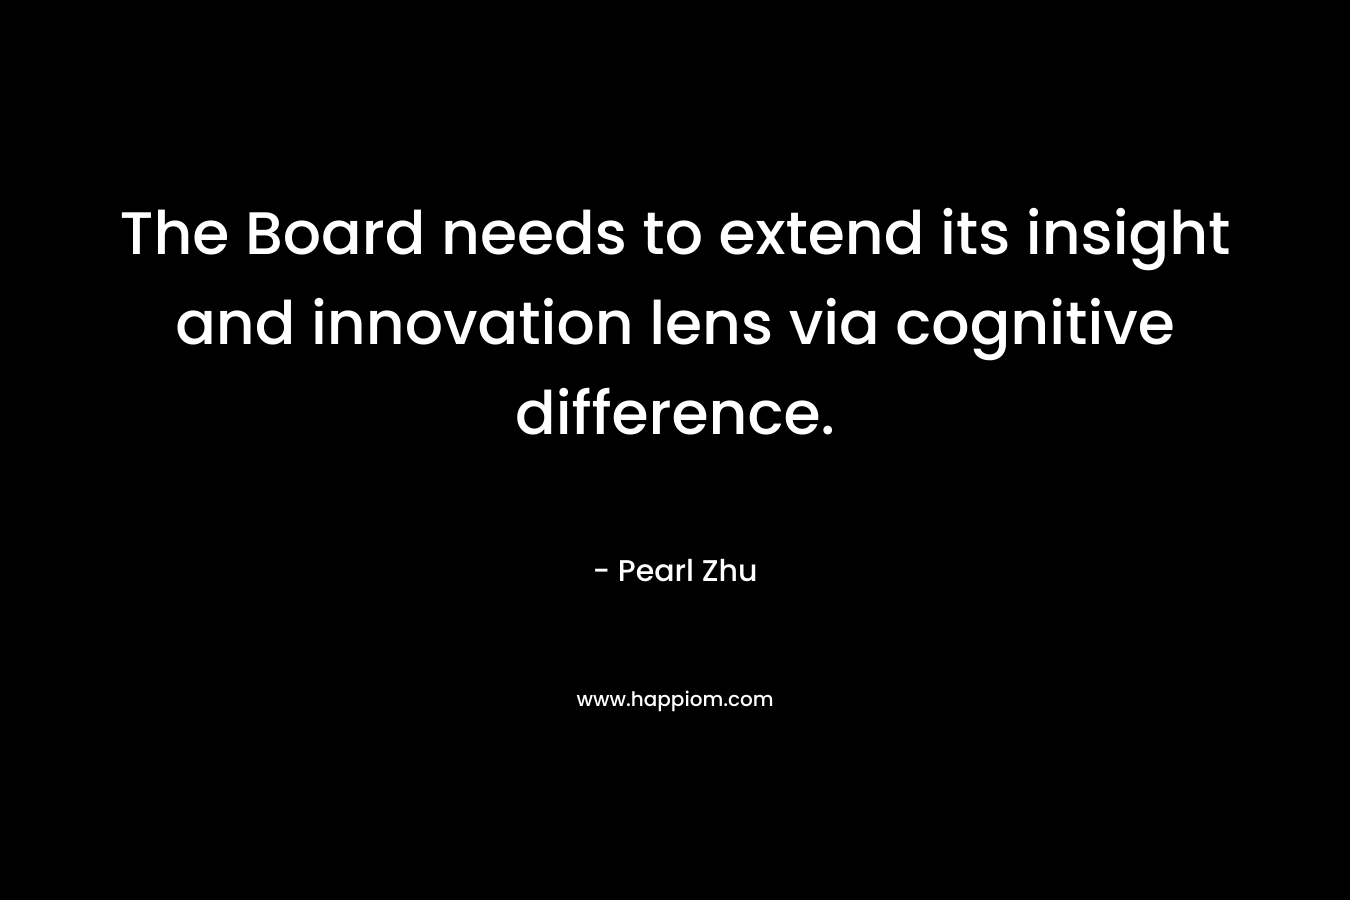 The Board needs to extend its insight and innovation lens via cognitive difference. – Pearl Zhu